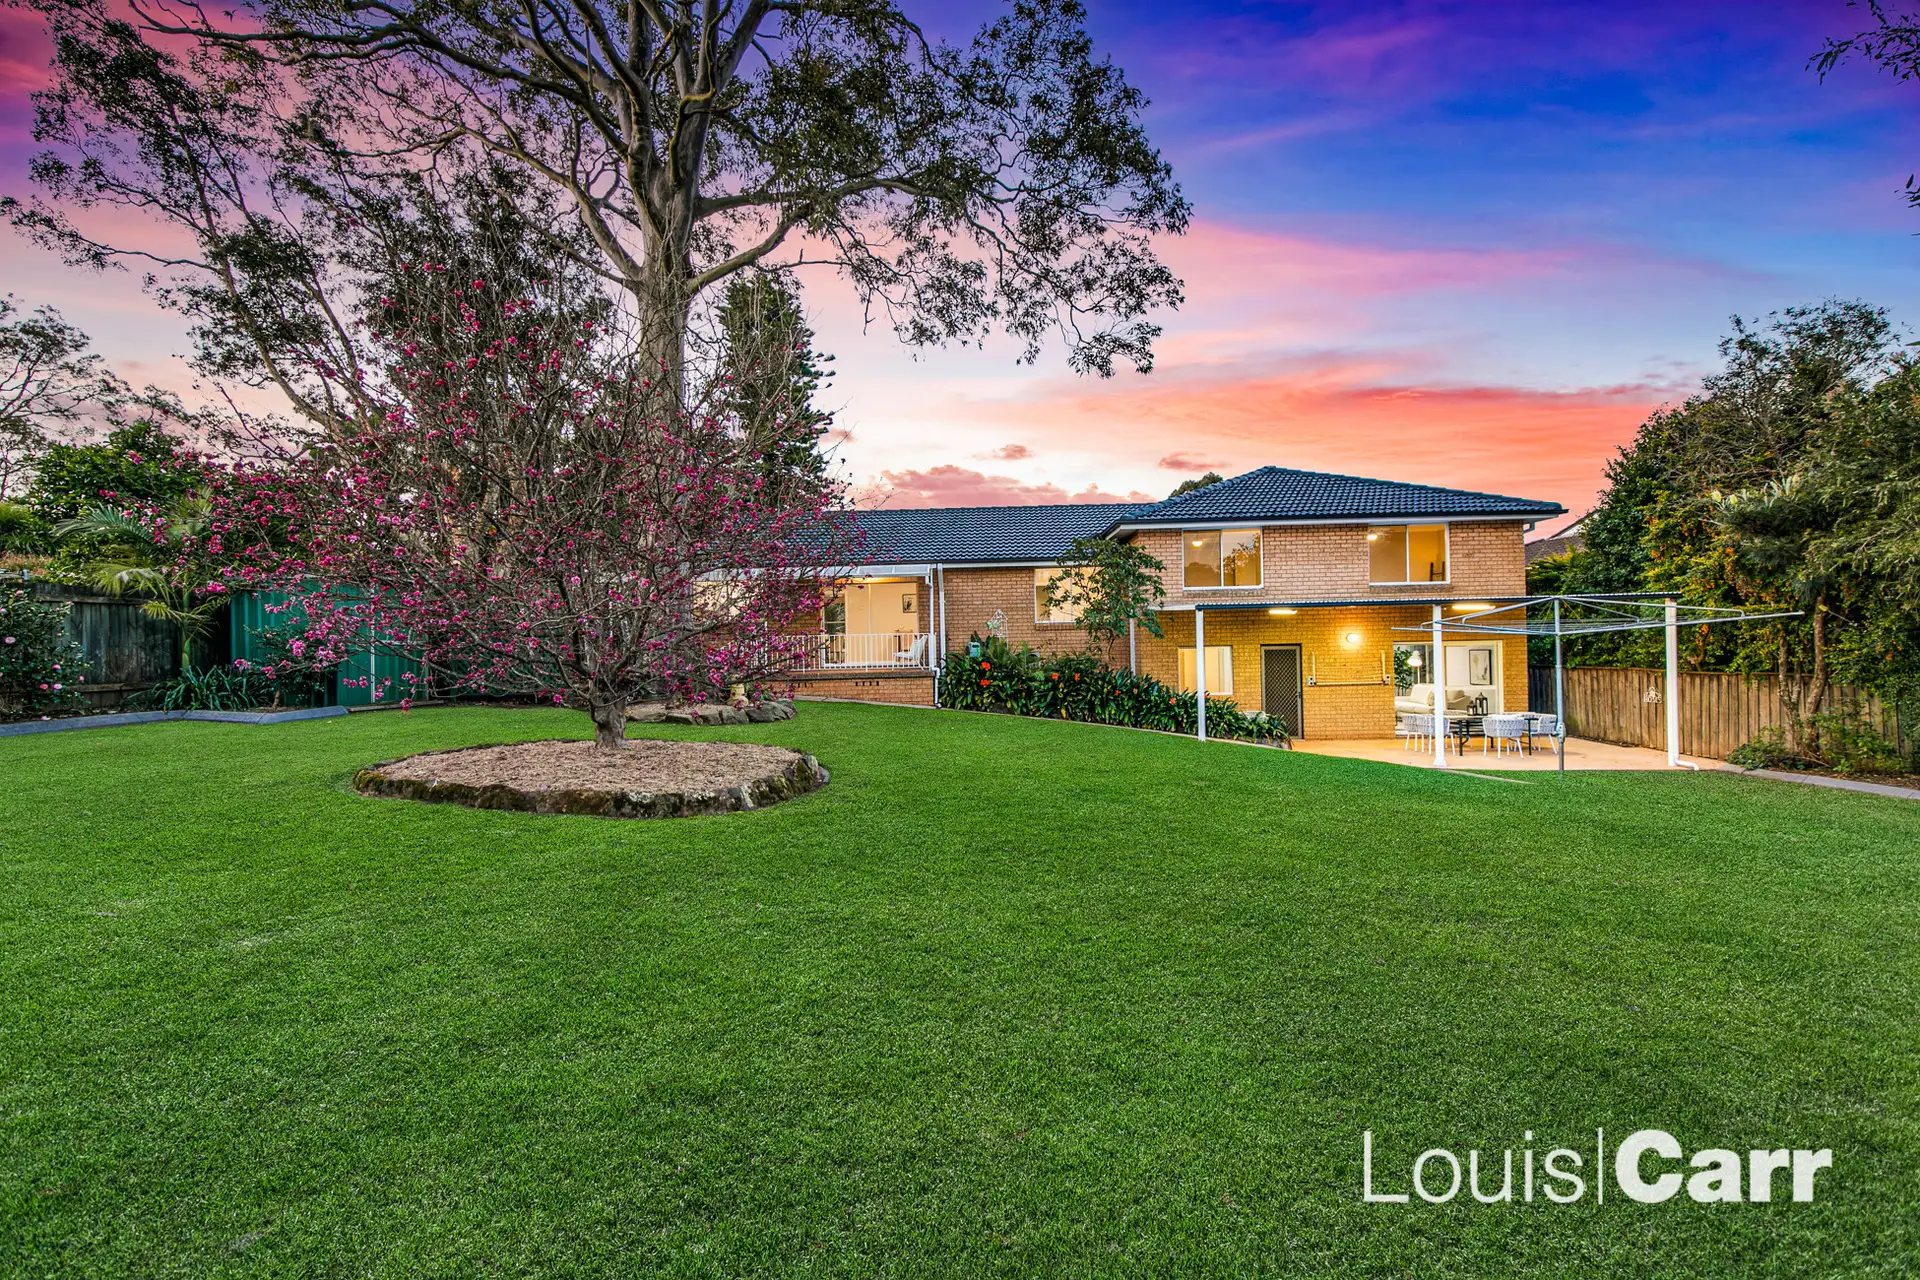 Photo #2: 4 Myson Drive, Cherrybrook - Sold by Louis Carr Real Estate